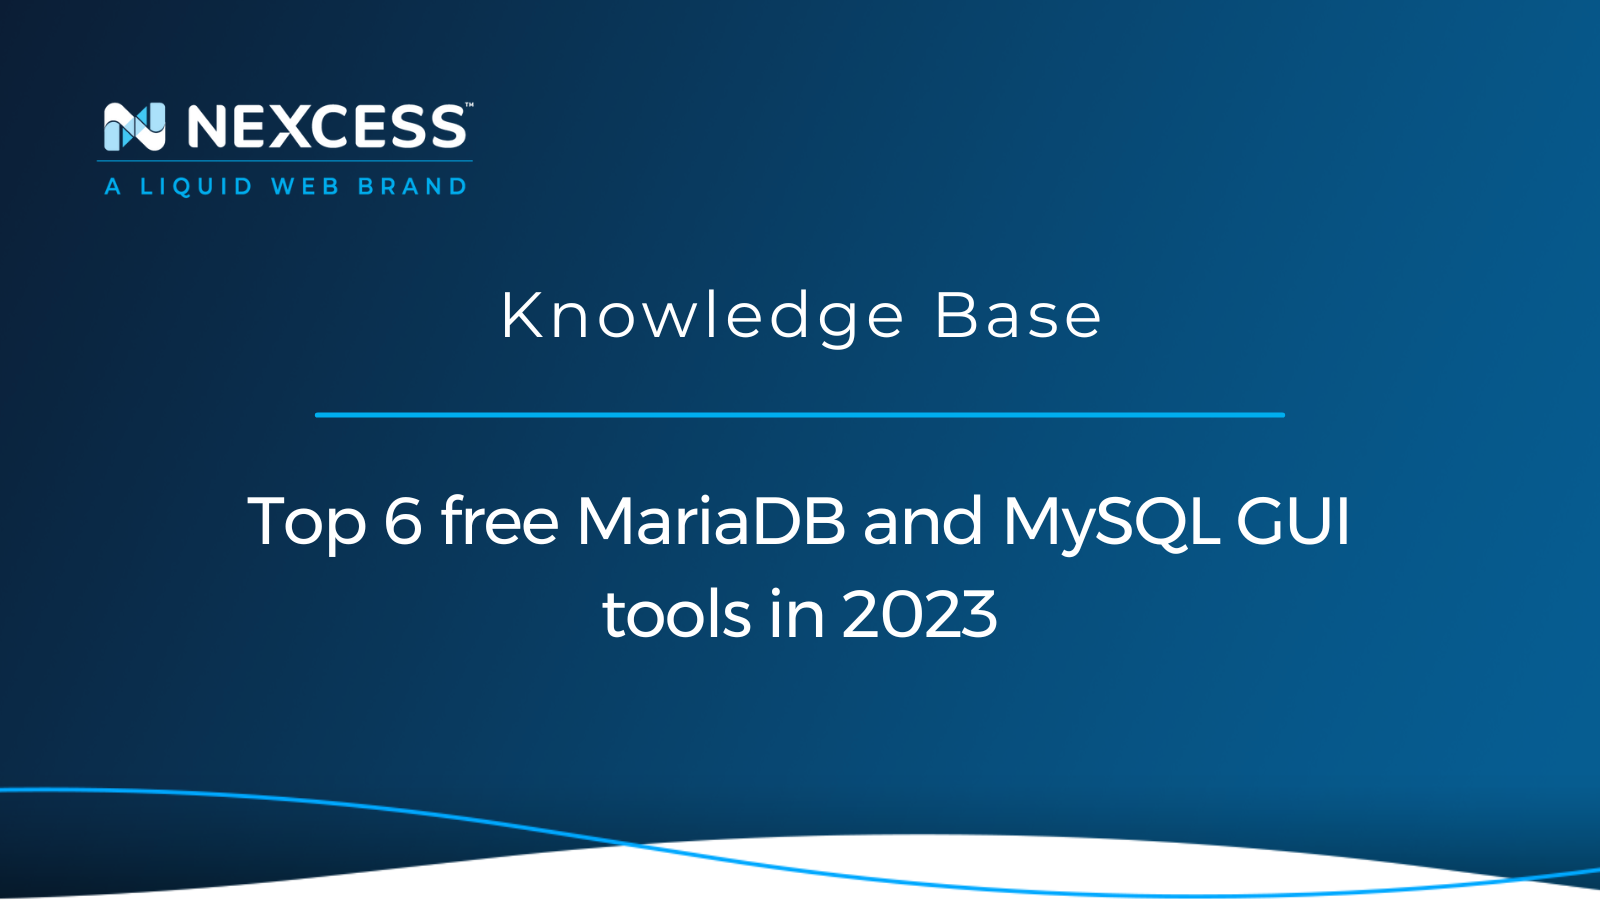 Beekeeper Studio 4.0 released with advanced SQL and database management  features